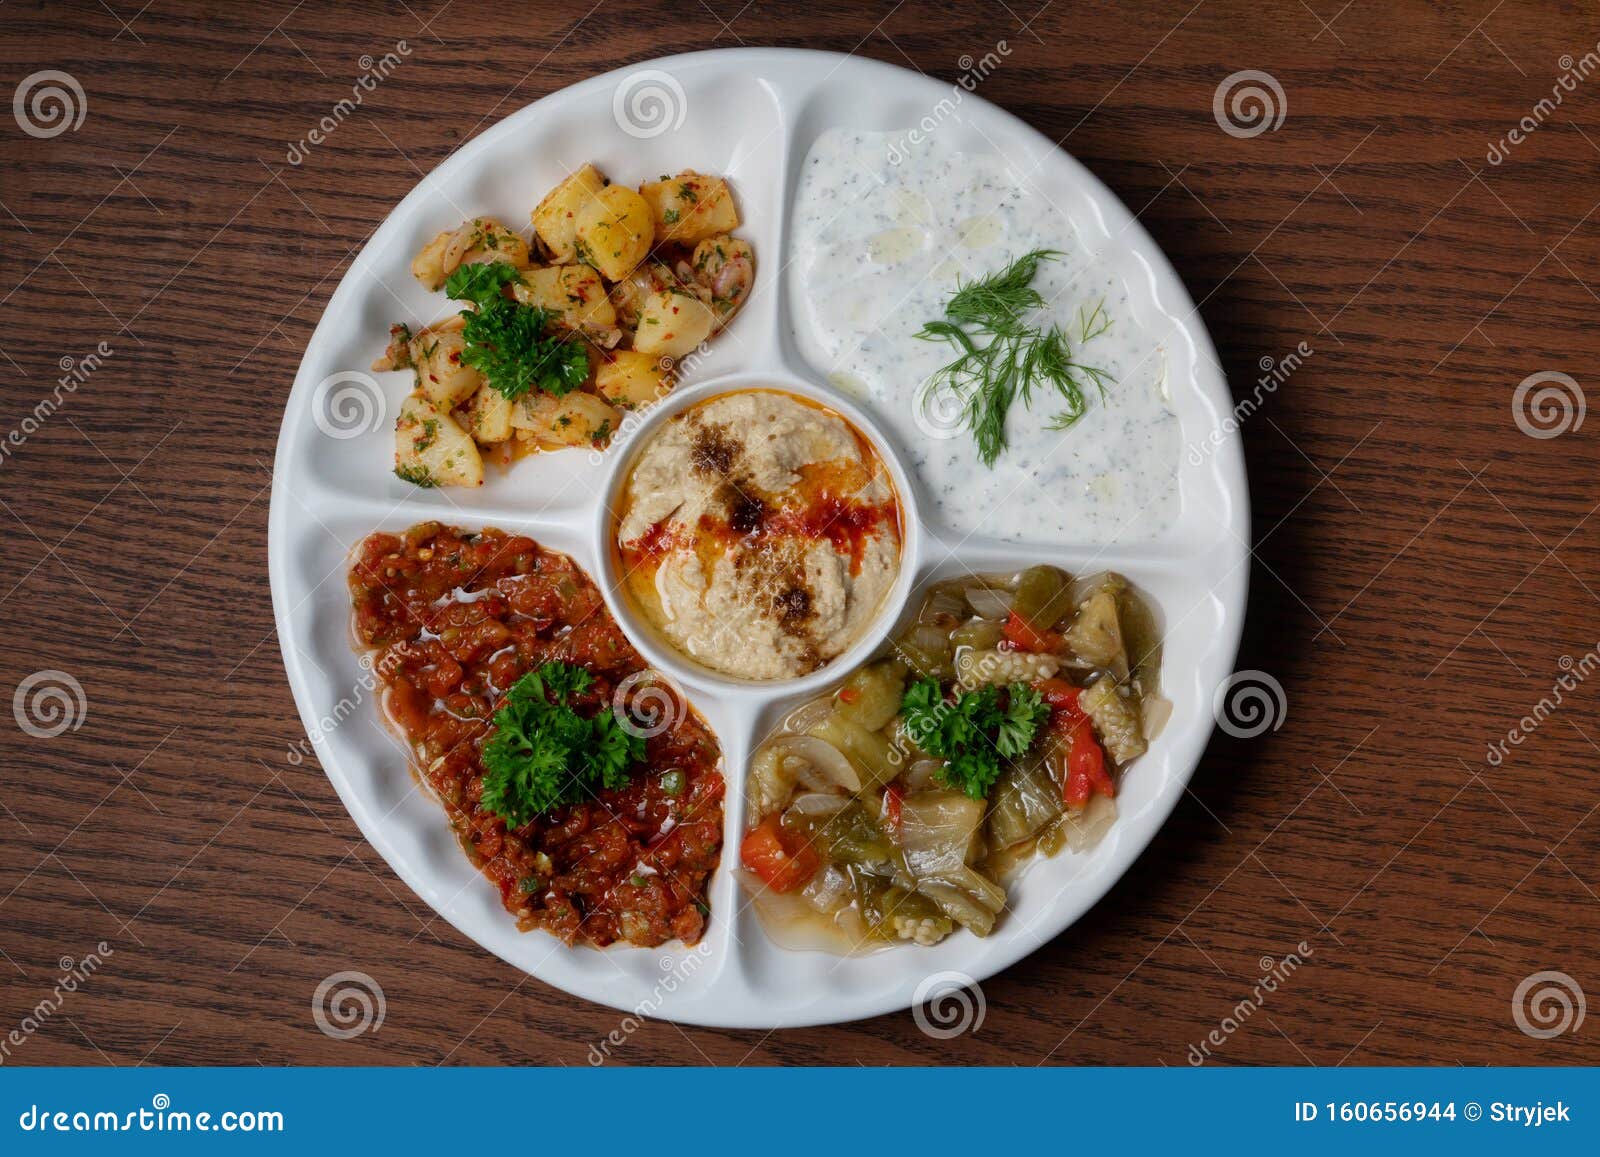 mix plate arabic food with vegetarian spread starters on wooden background